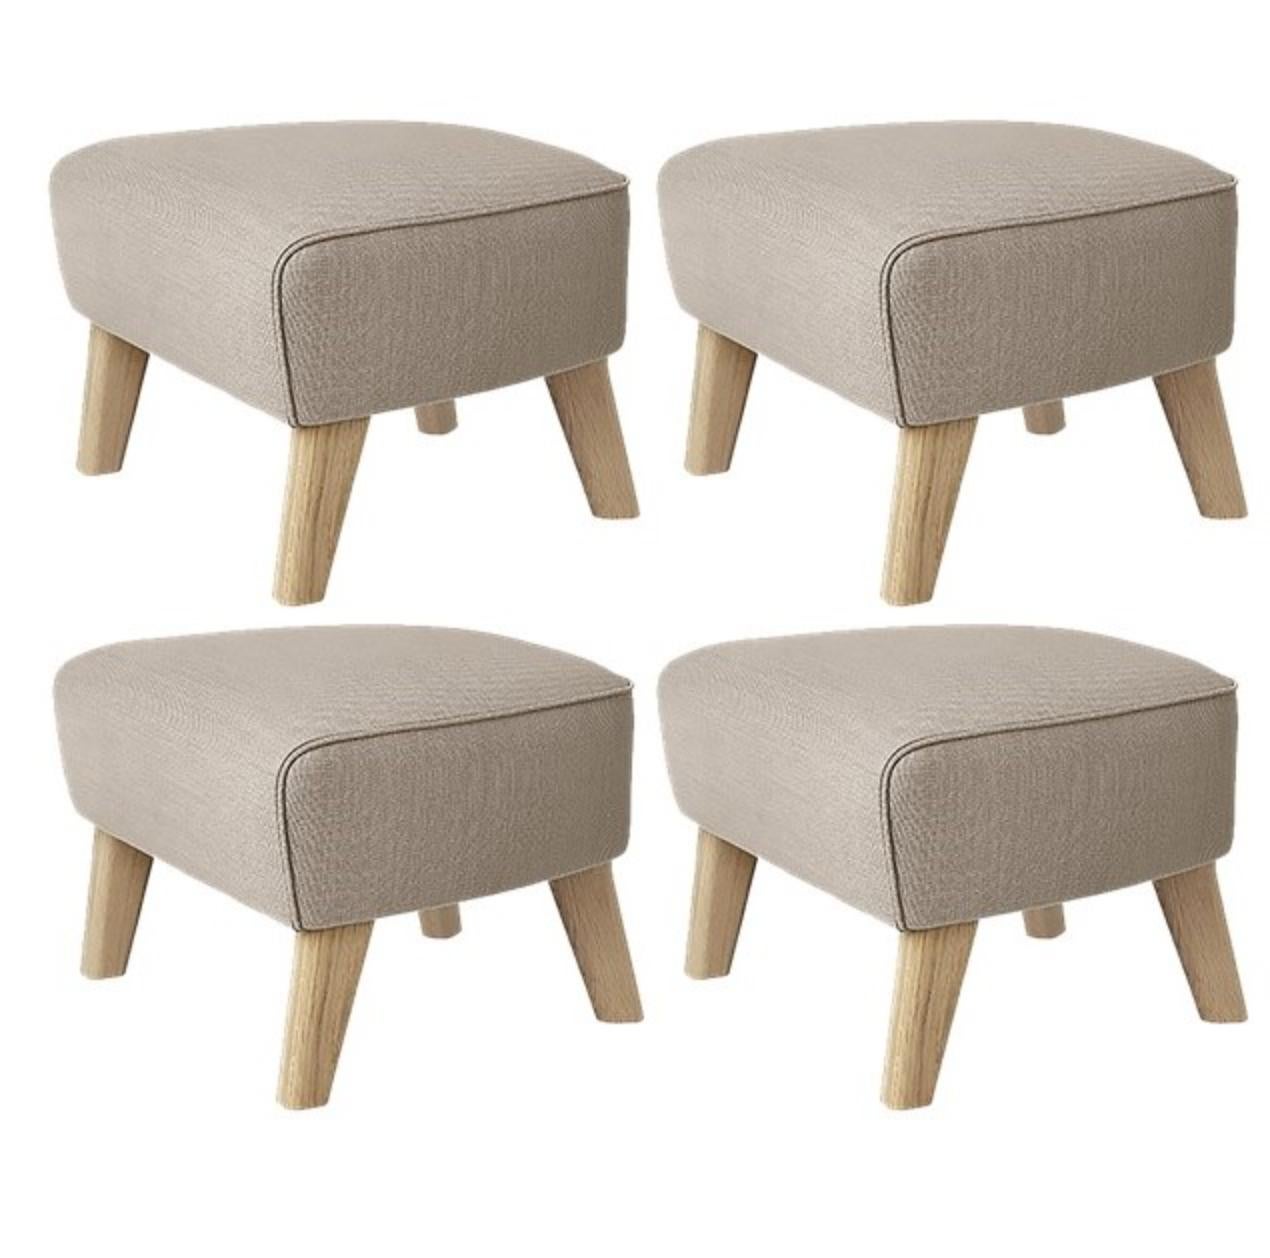 Set of 4 beige and natural oak Sahco Zero Footstool by Lassen
Dimensions: W 56 x D 58 x H 40 cm 
Materials: Textile
Also available: other colors available.

The My Own Chair Footstool has been designed in the same spirit as Flemming Lassen’s